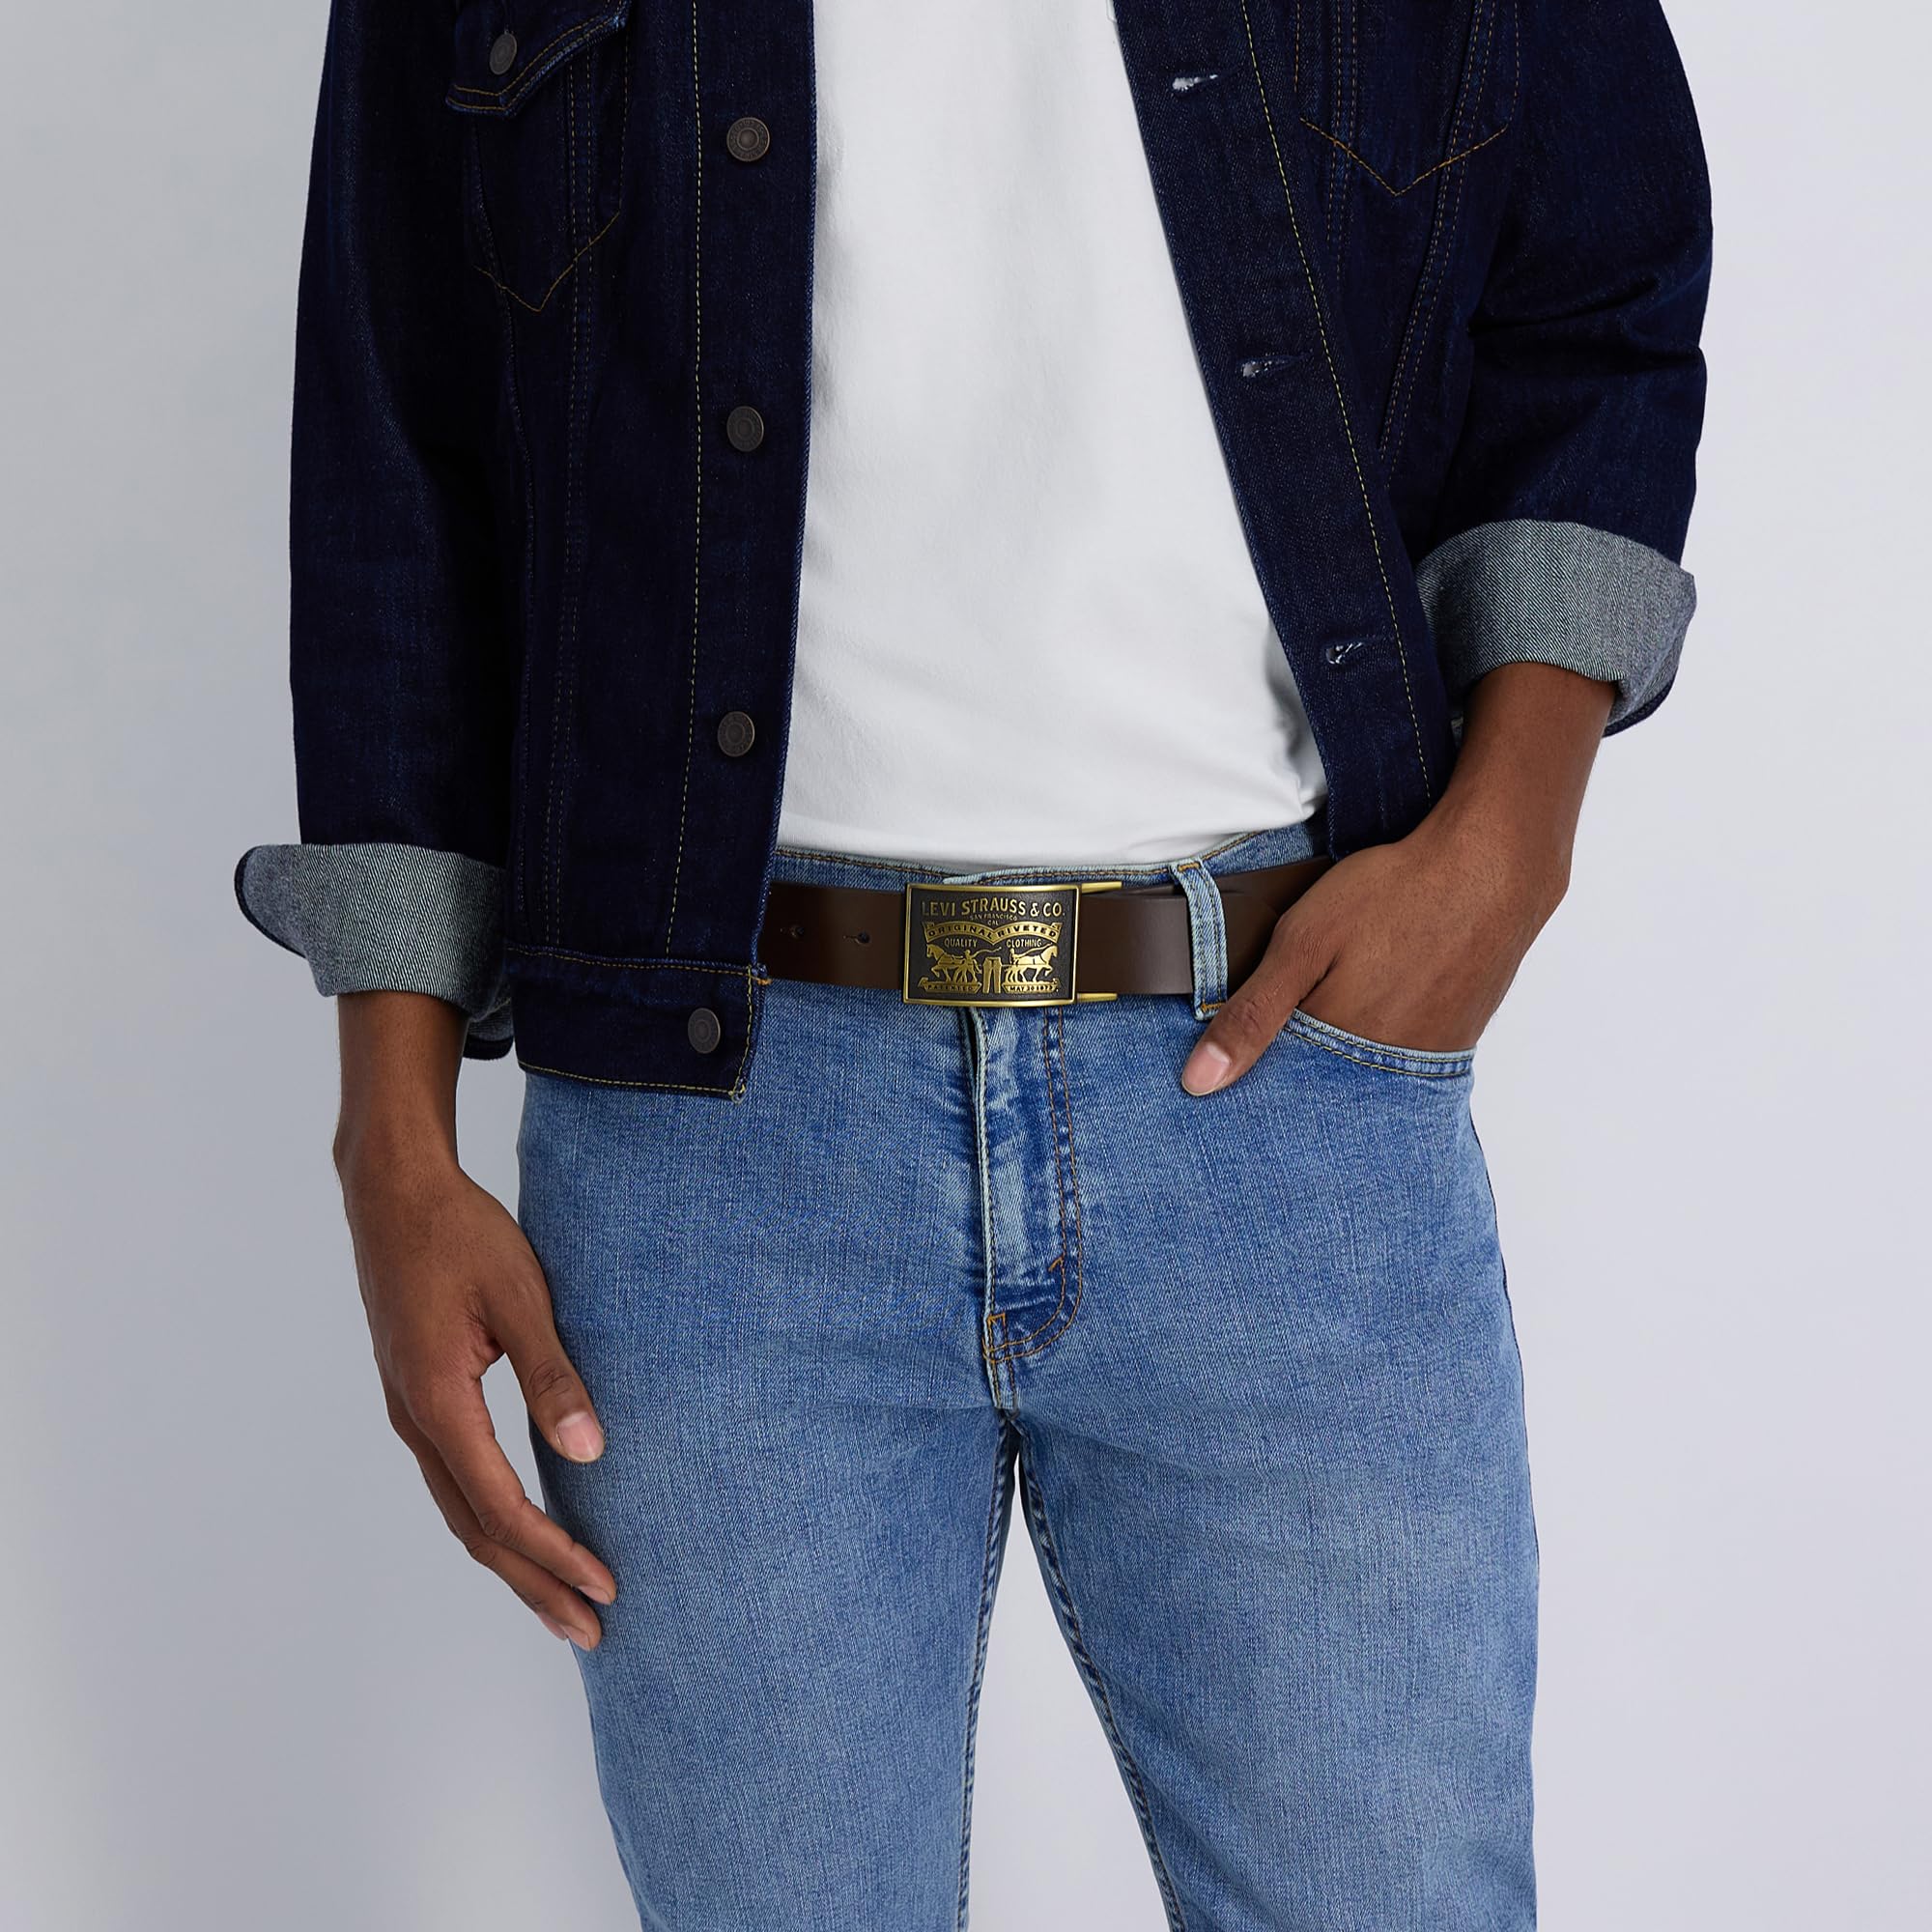 Levi's Men's Everyday Jean Belt with Removable Plaque Buckle